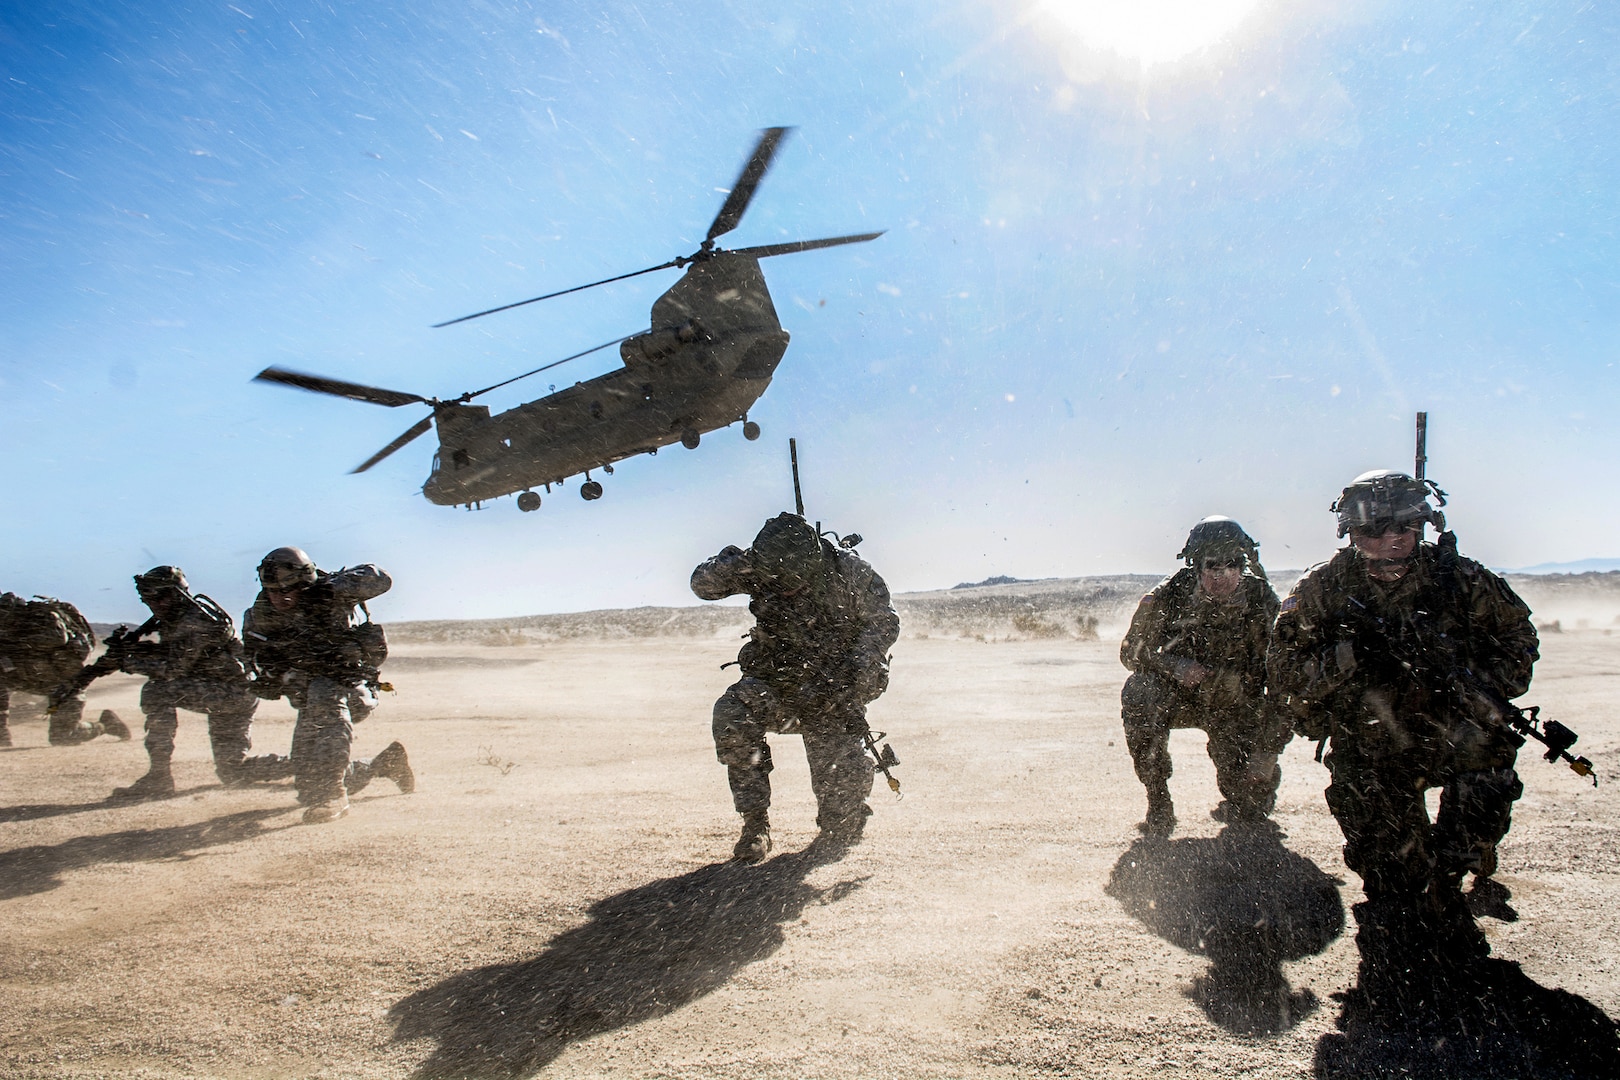 Soldiers maintain security as a CH-47 Chinook departs the HLZ during an air assault training exercise in the National Training Center, California, Jan. 25, 2017. The purpose of this mission was to demonstrate the troop's ability to carry out complex attacks while enhancing the unit's ability of employing aviation resources.